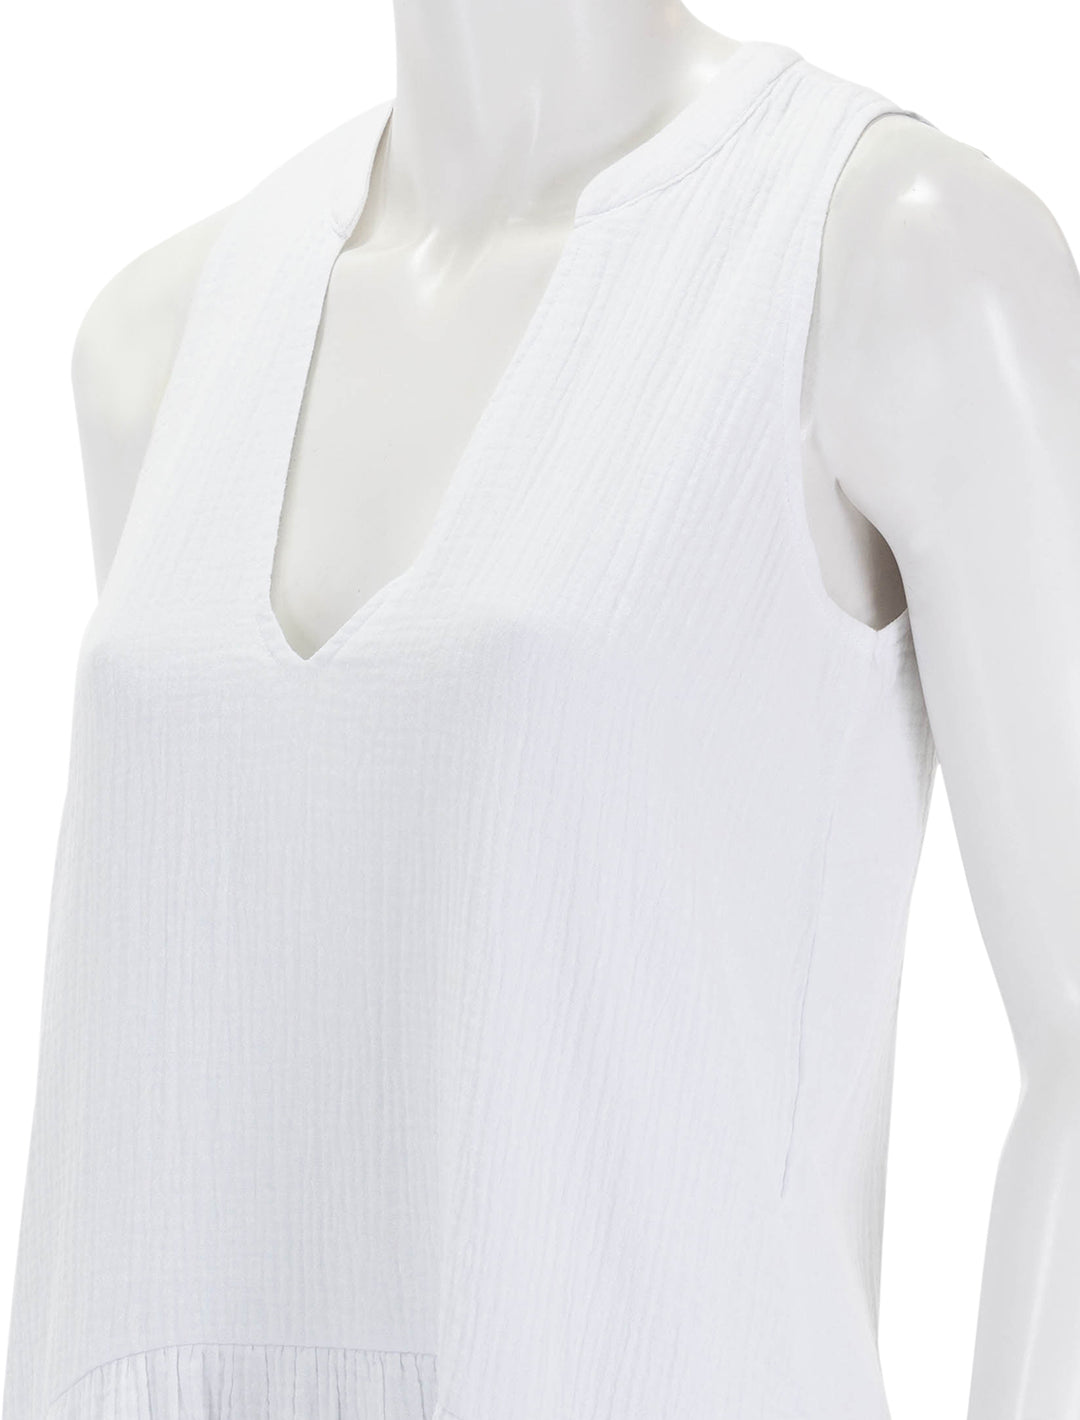 Close-up view of Splendid's sumner gauze maxi dress in white.